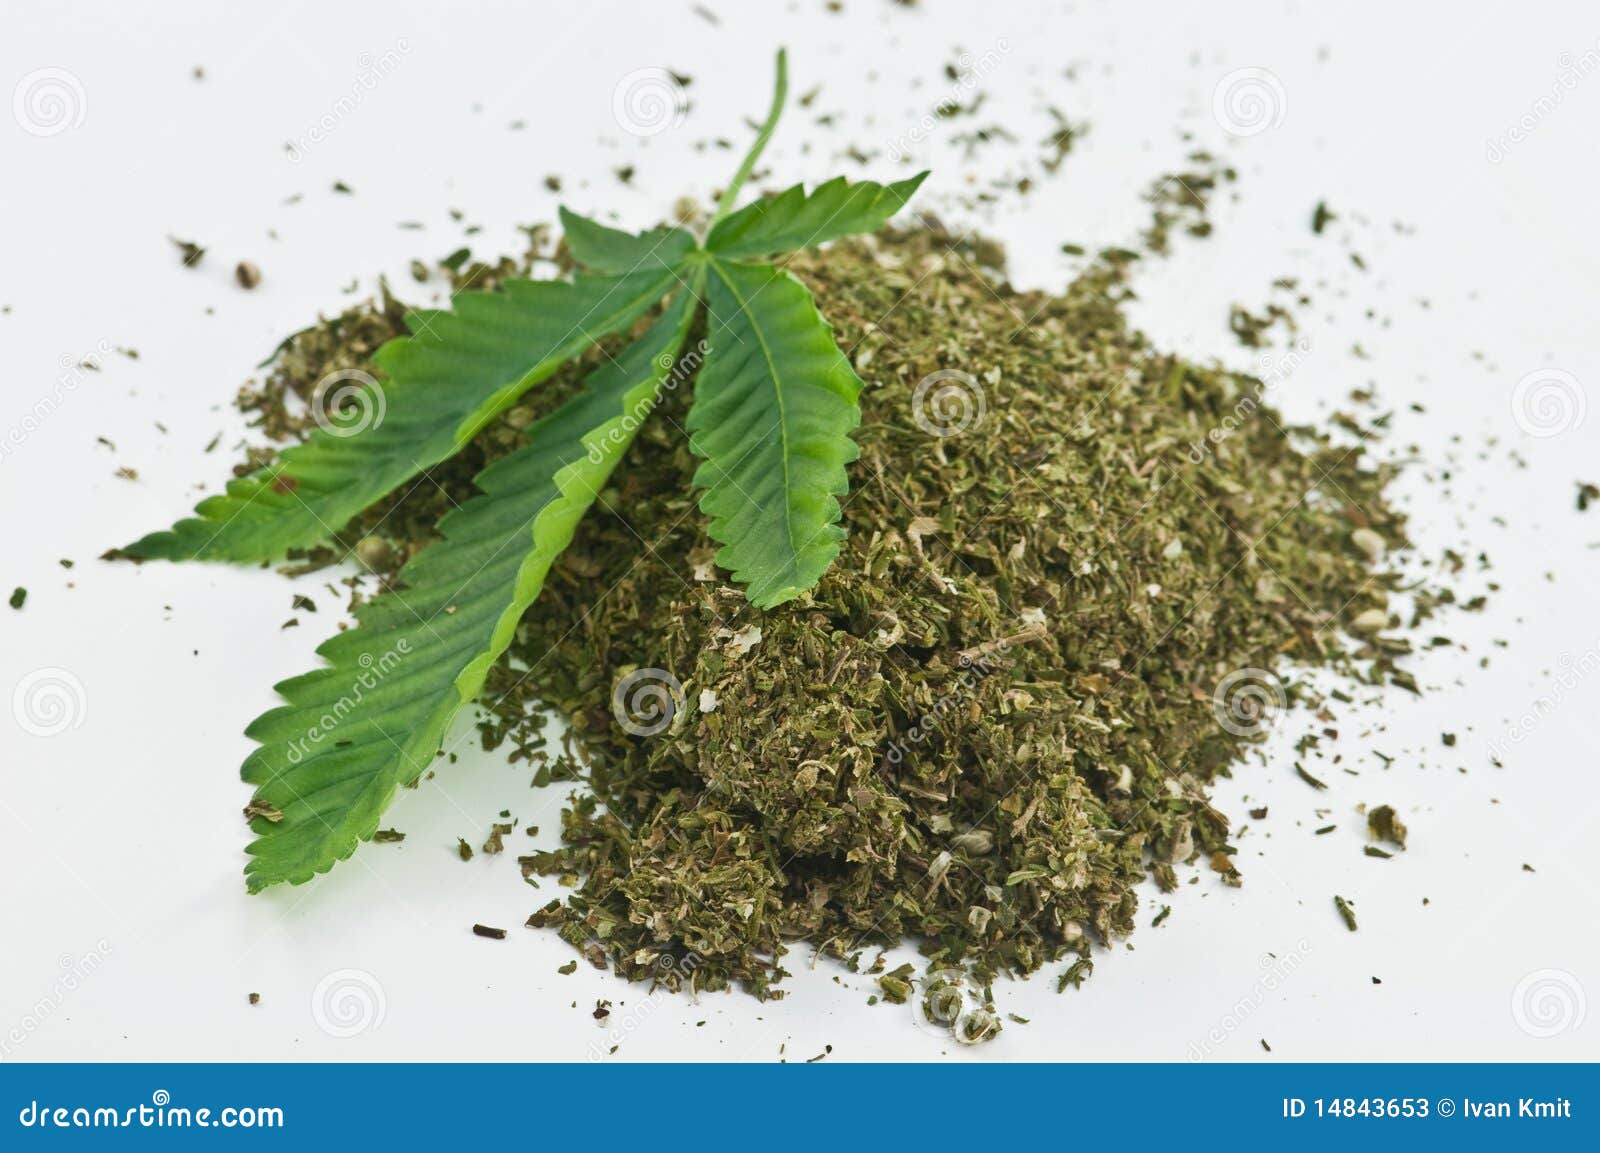 Image result for picture of marijuana